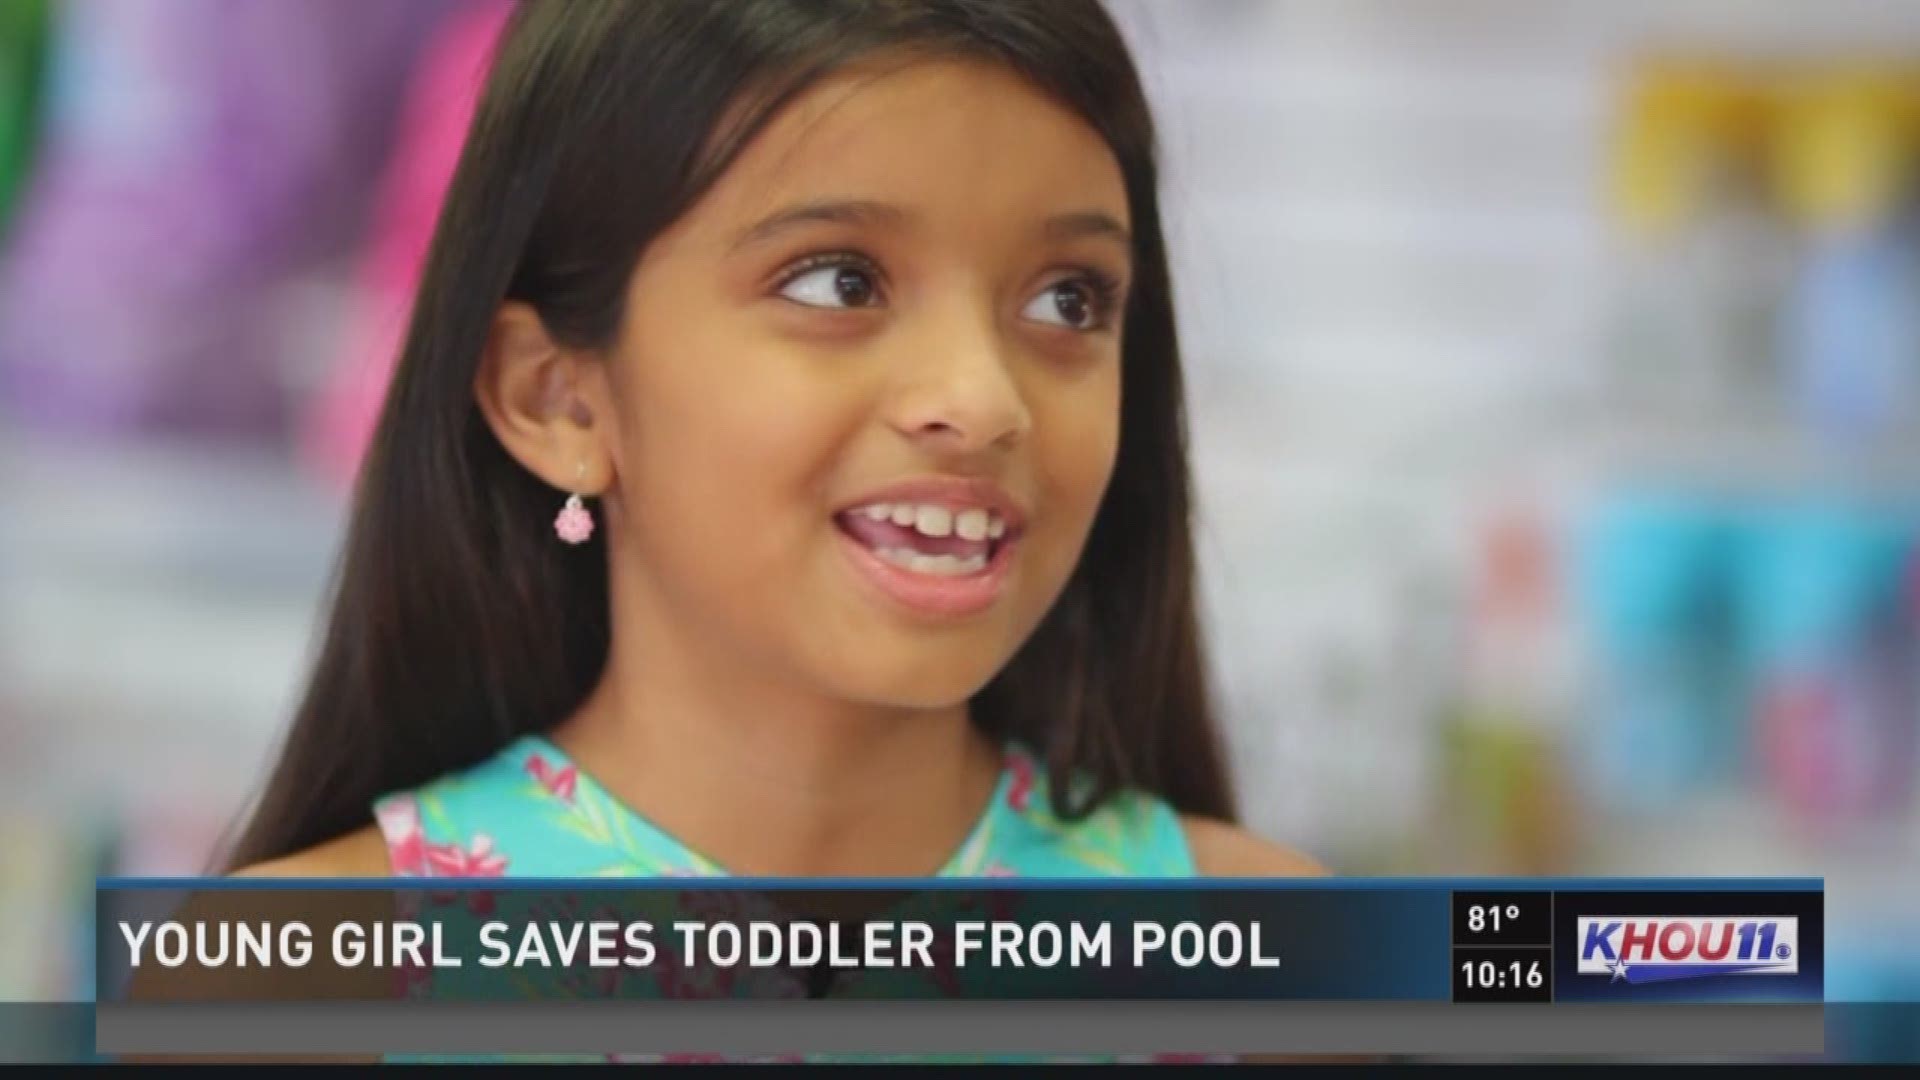 A weekend party turned scary when a toddler ended up at the bottom of a pool, but it was a little girl who jumped in and saved his life.